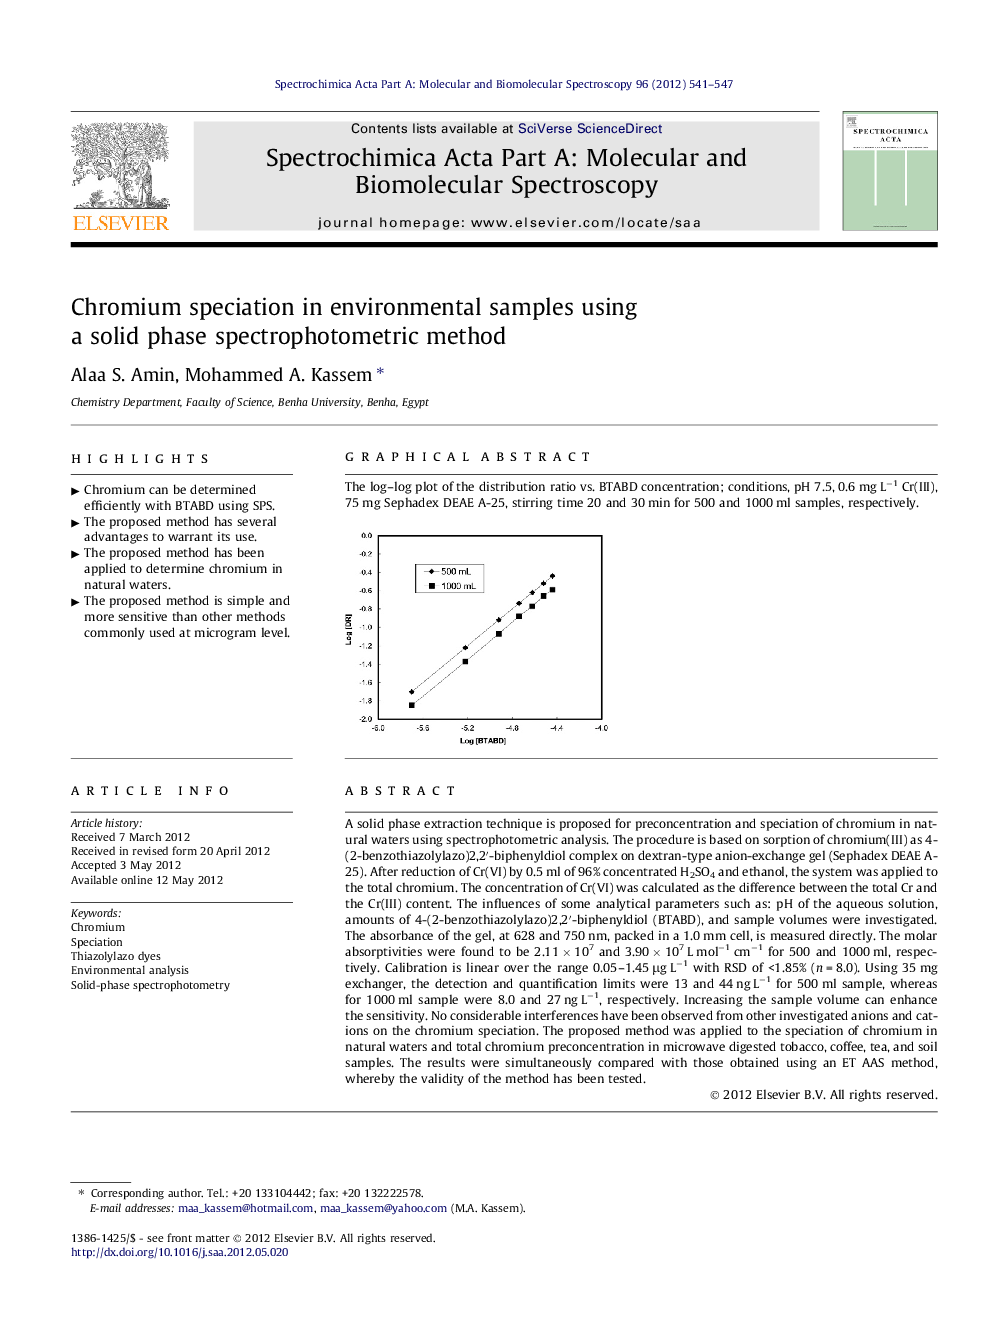 Chromium speciation in environmental samples using a solid phase spectrophotometric method